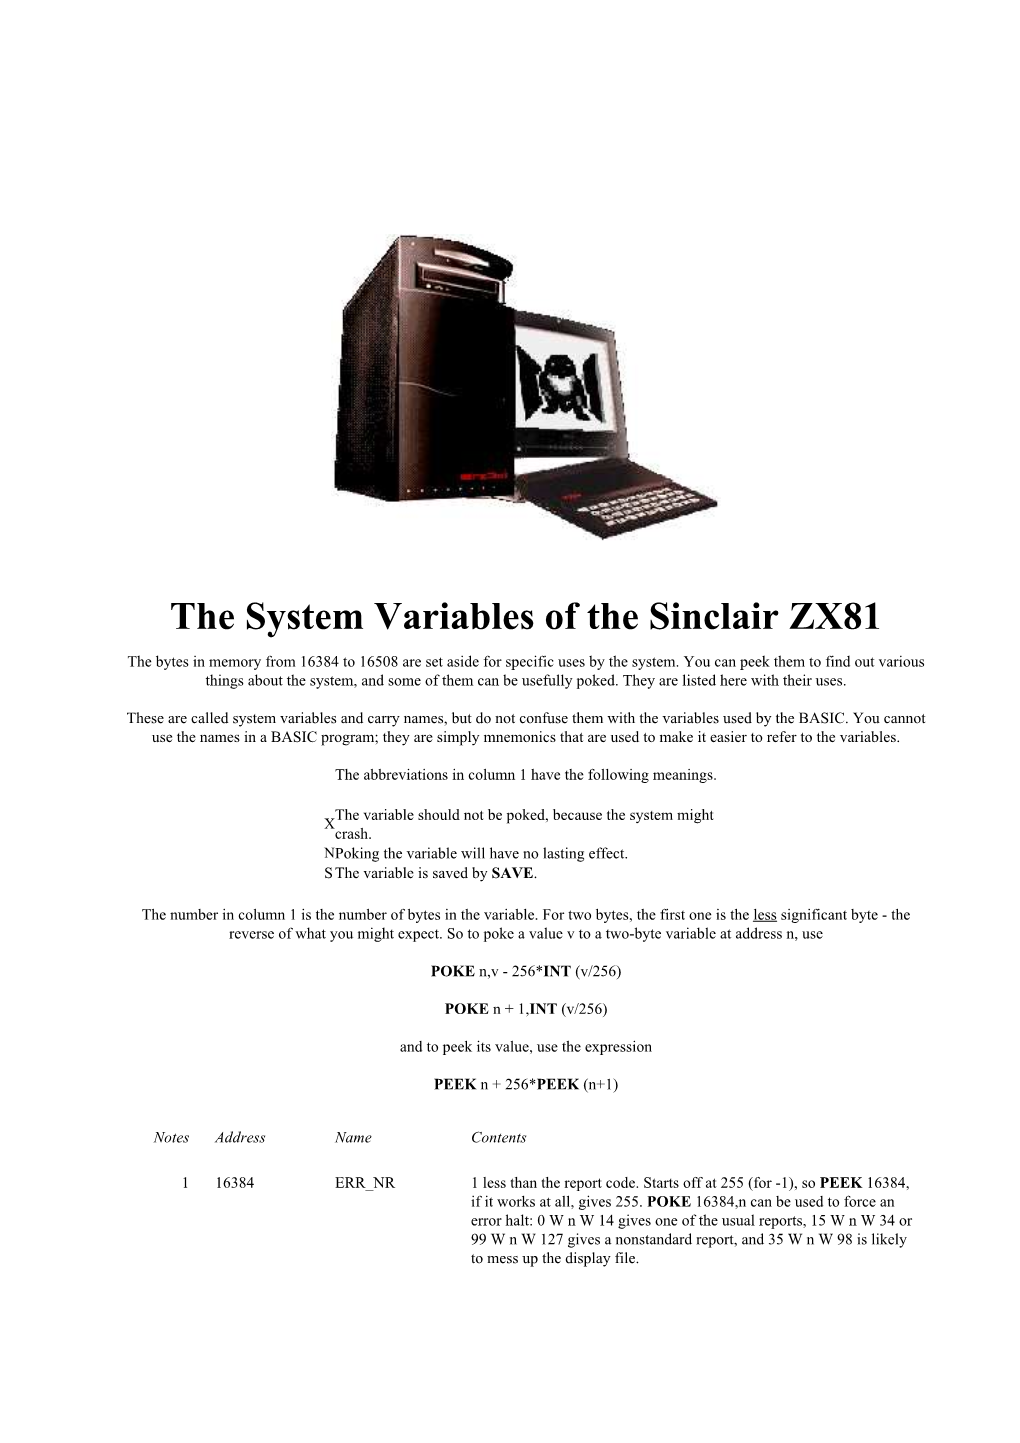 The System Variables of the Sinclair ZX81